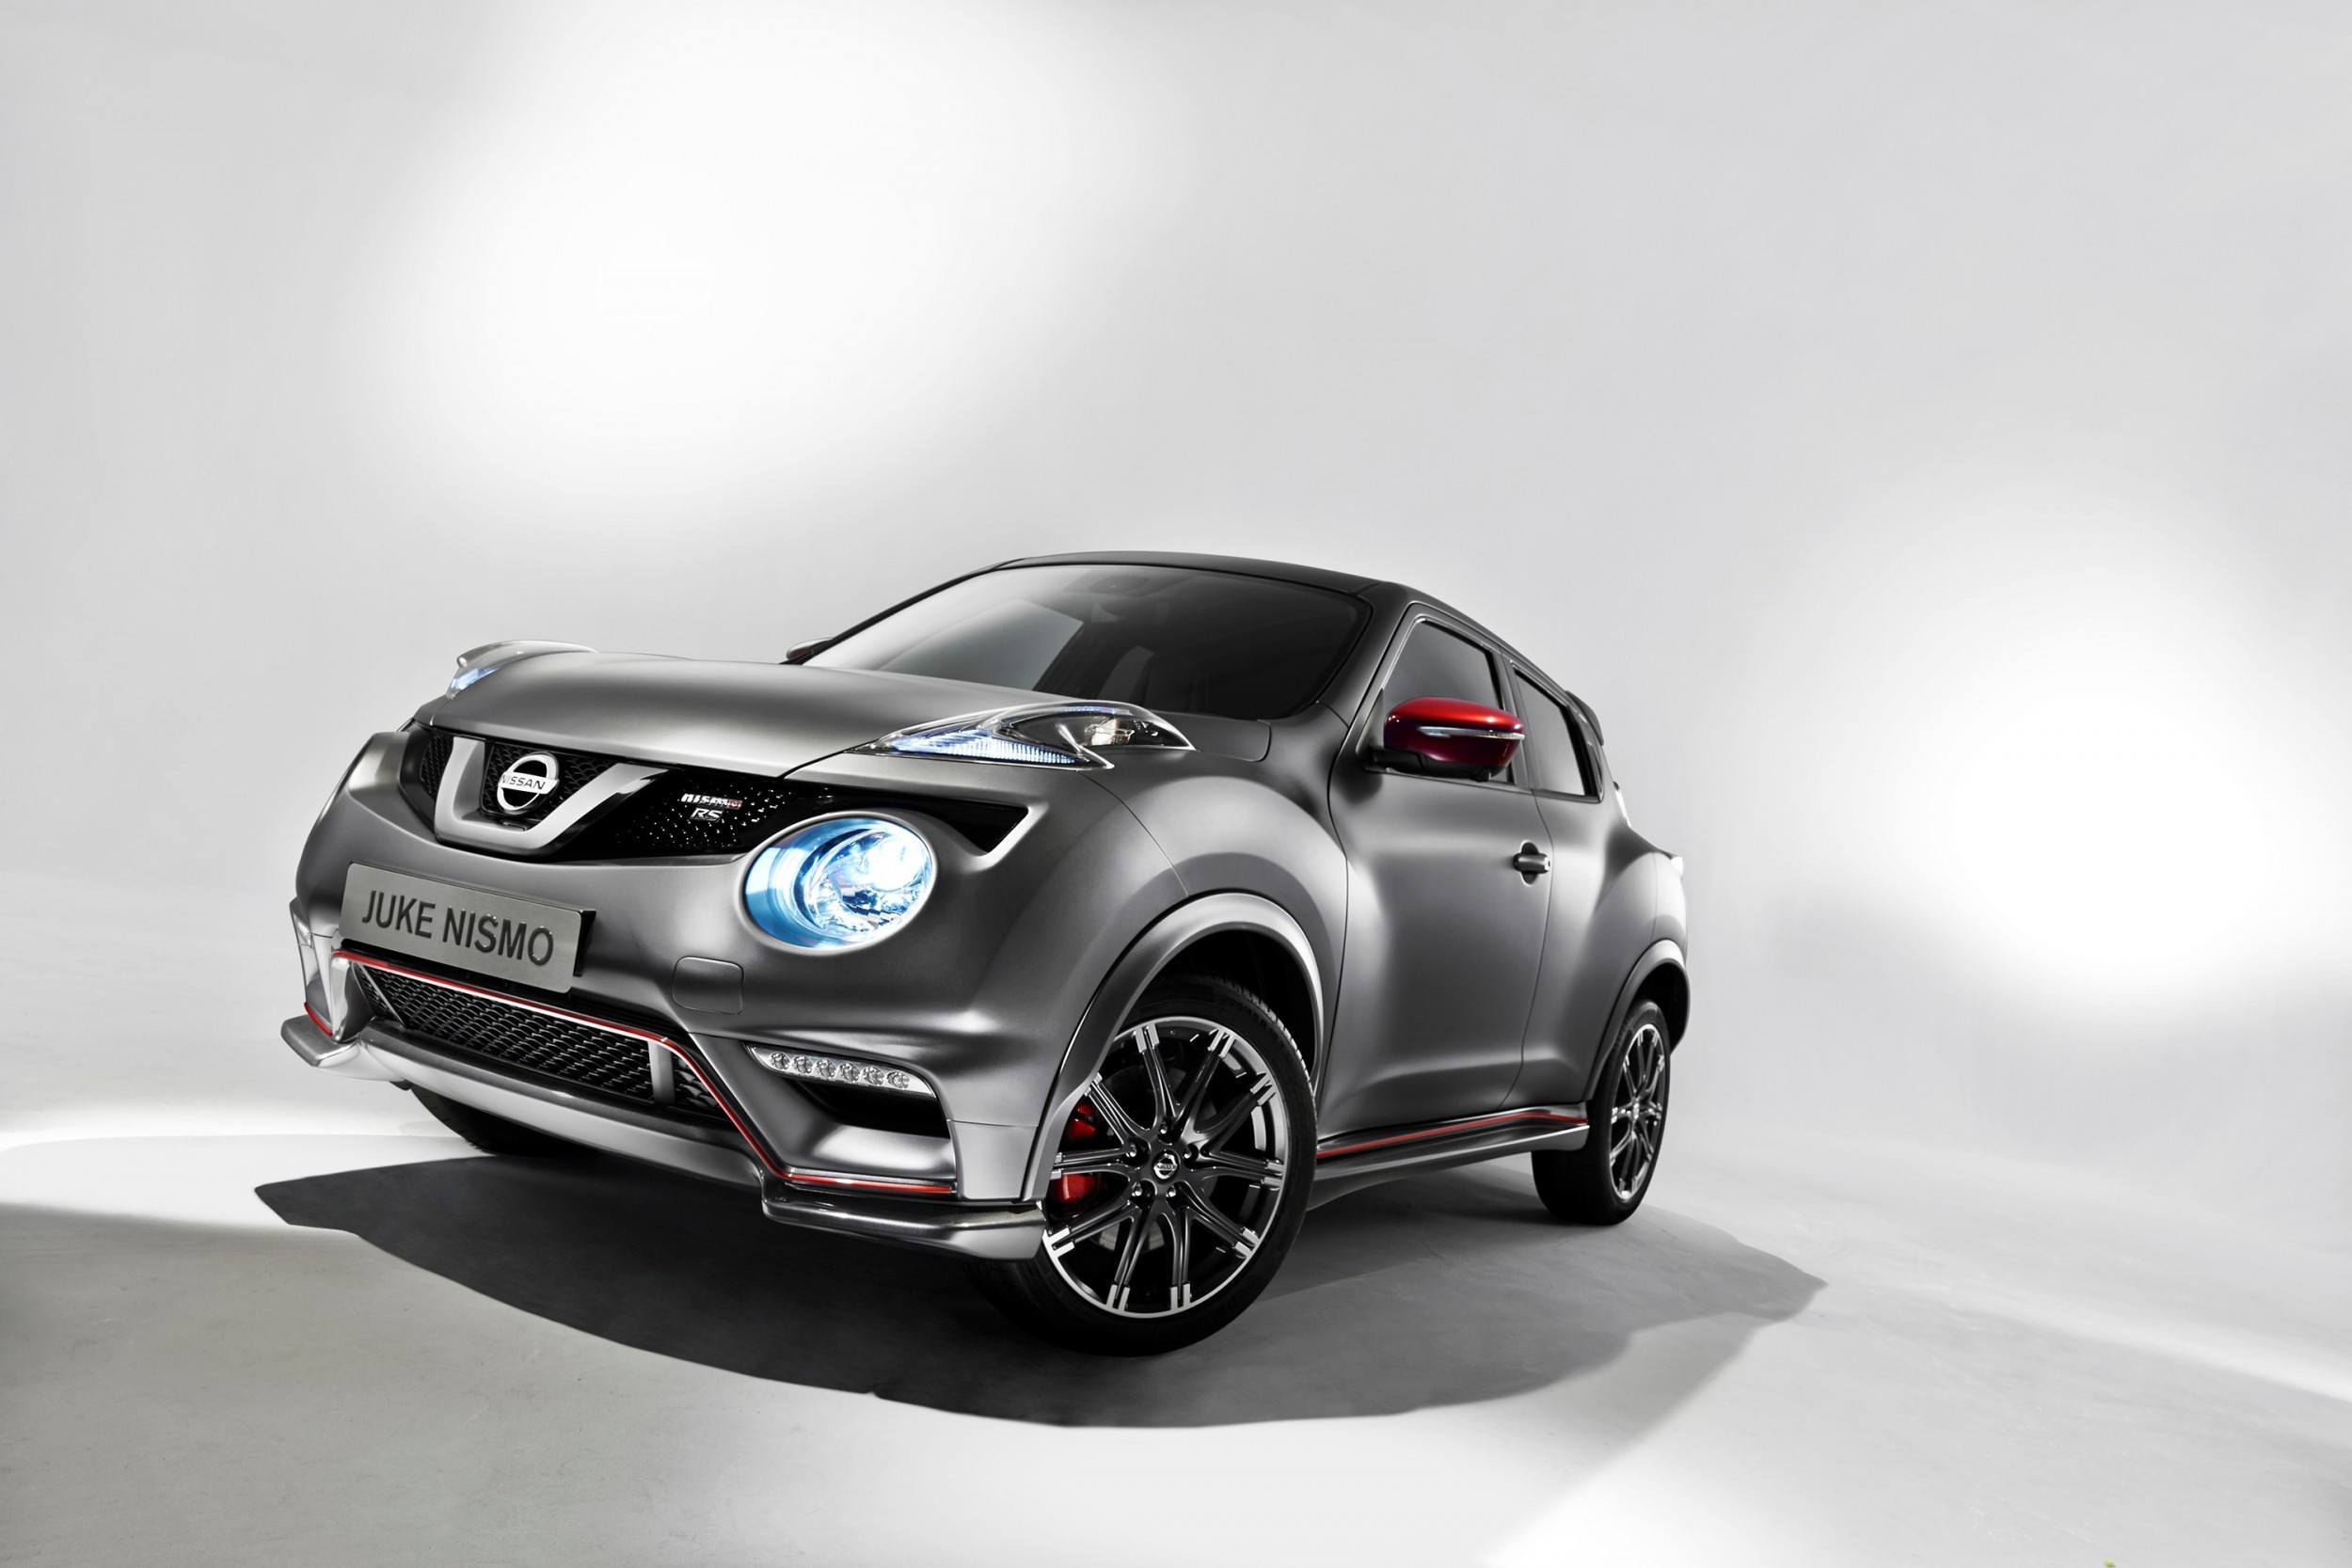 Okay Now European Juke Nismo Rs Features Matching Leds Above And Below